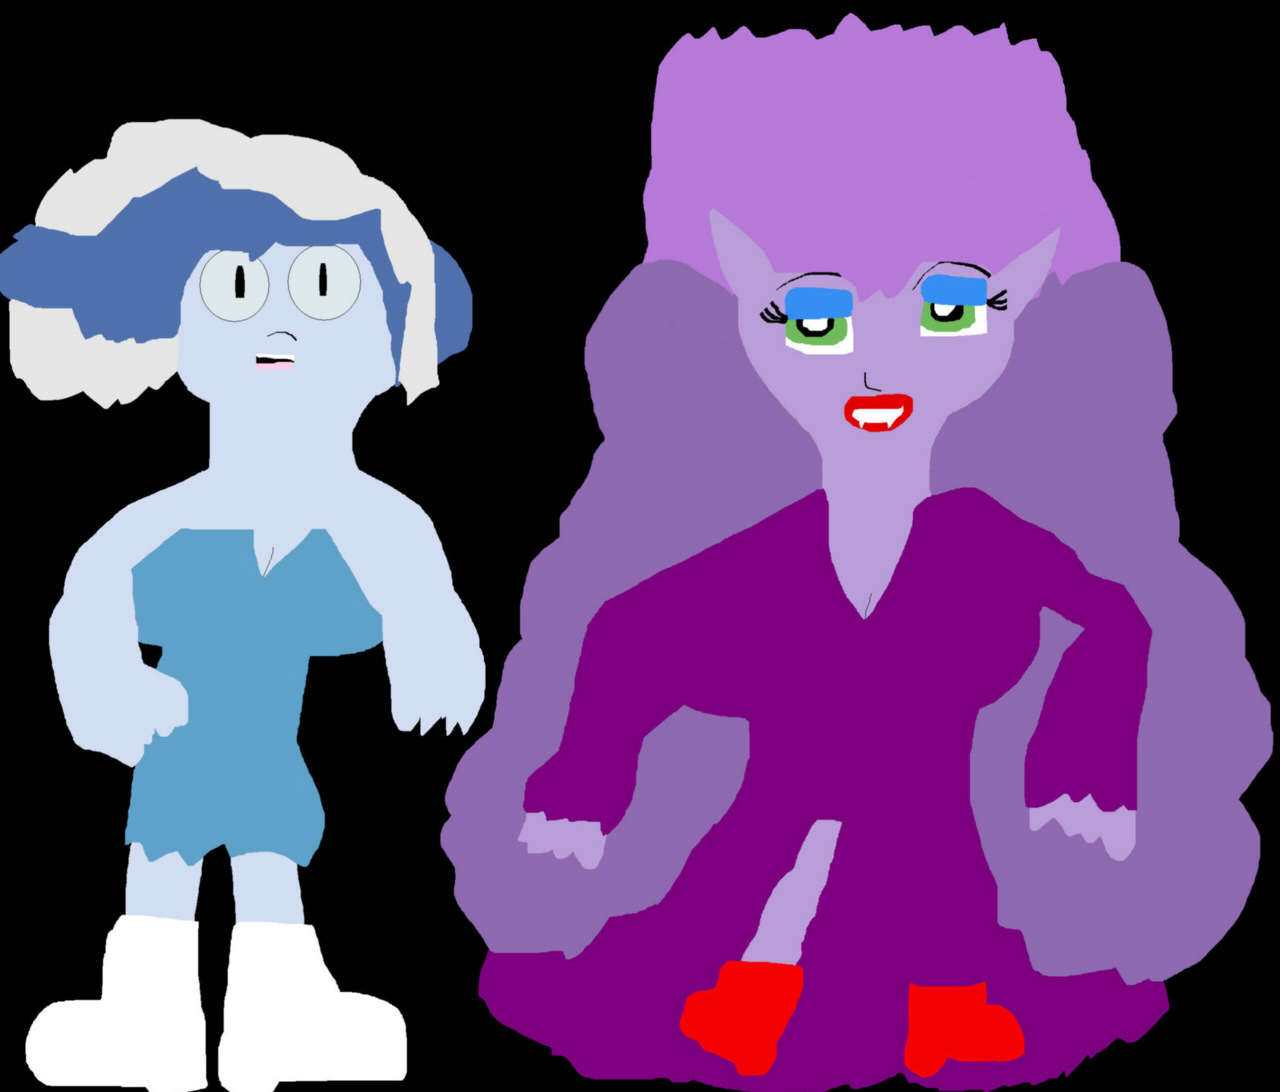 Sibella and Phantasma The Older Years  Request For STORMERS-ATTiTOONS by Falconlobo